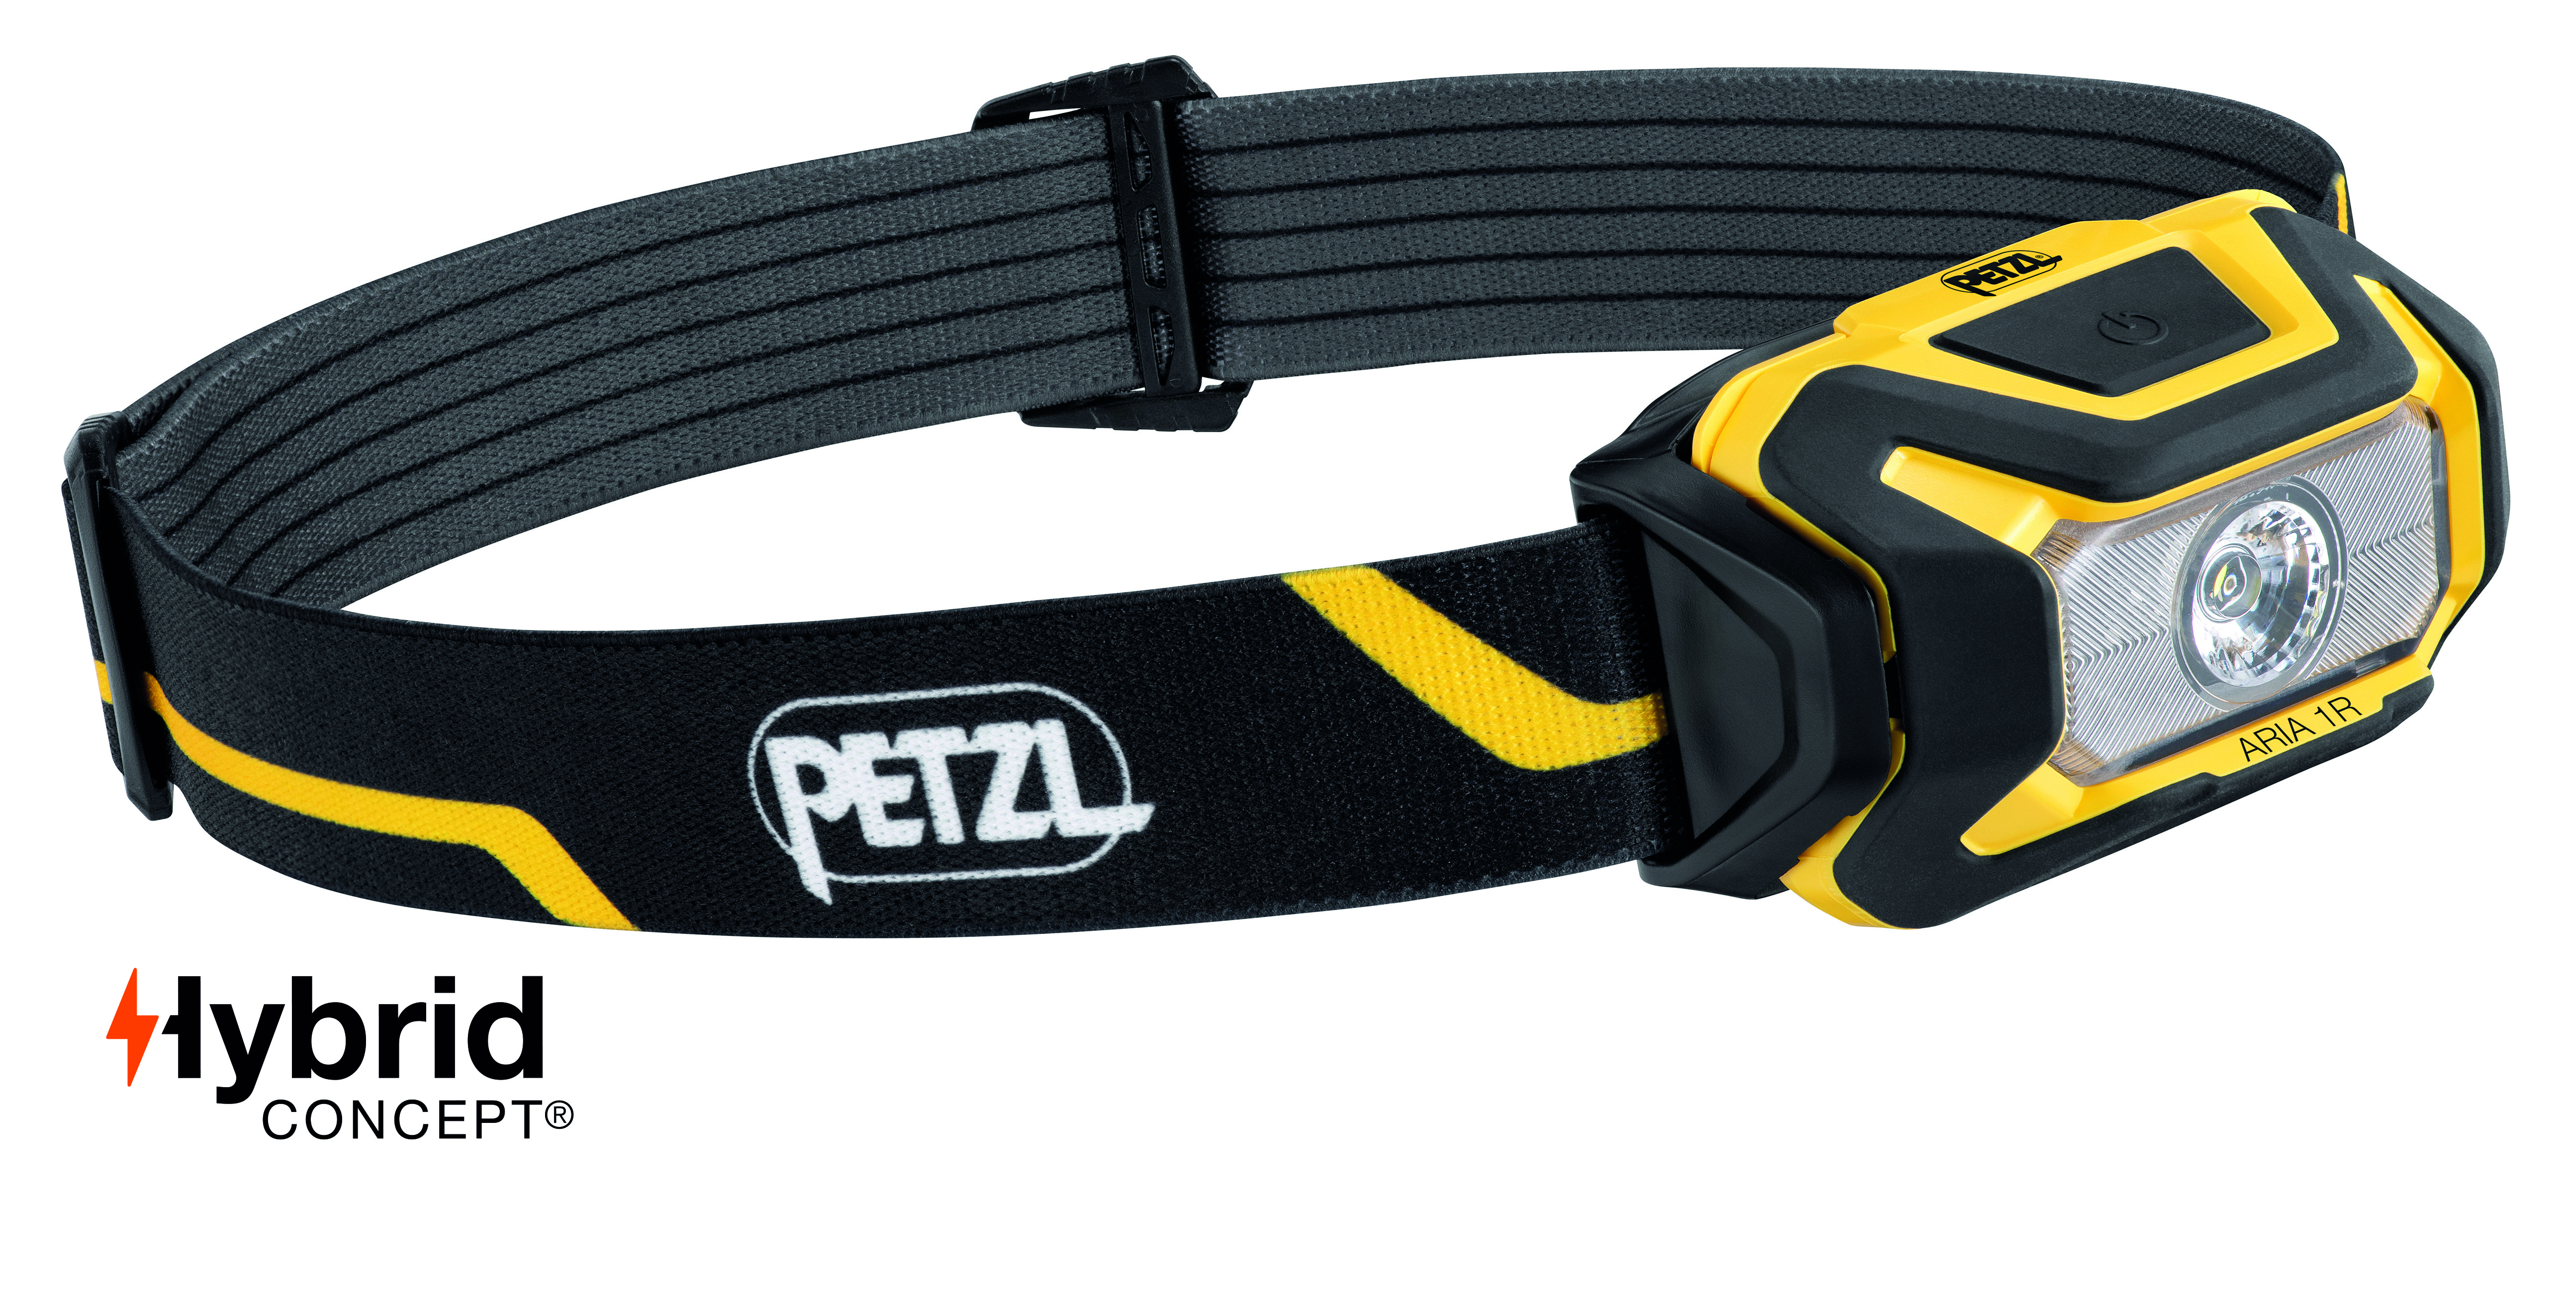 Petzl ARIA 1 R Compact Headlamp from Columbia Safety